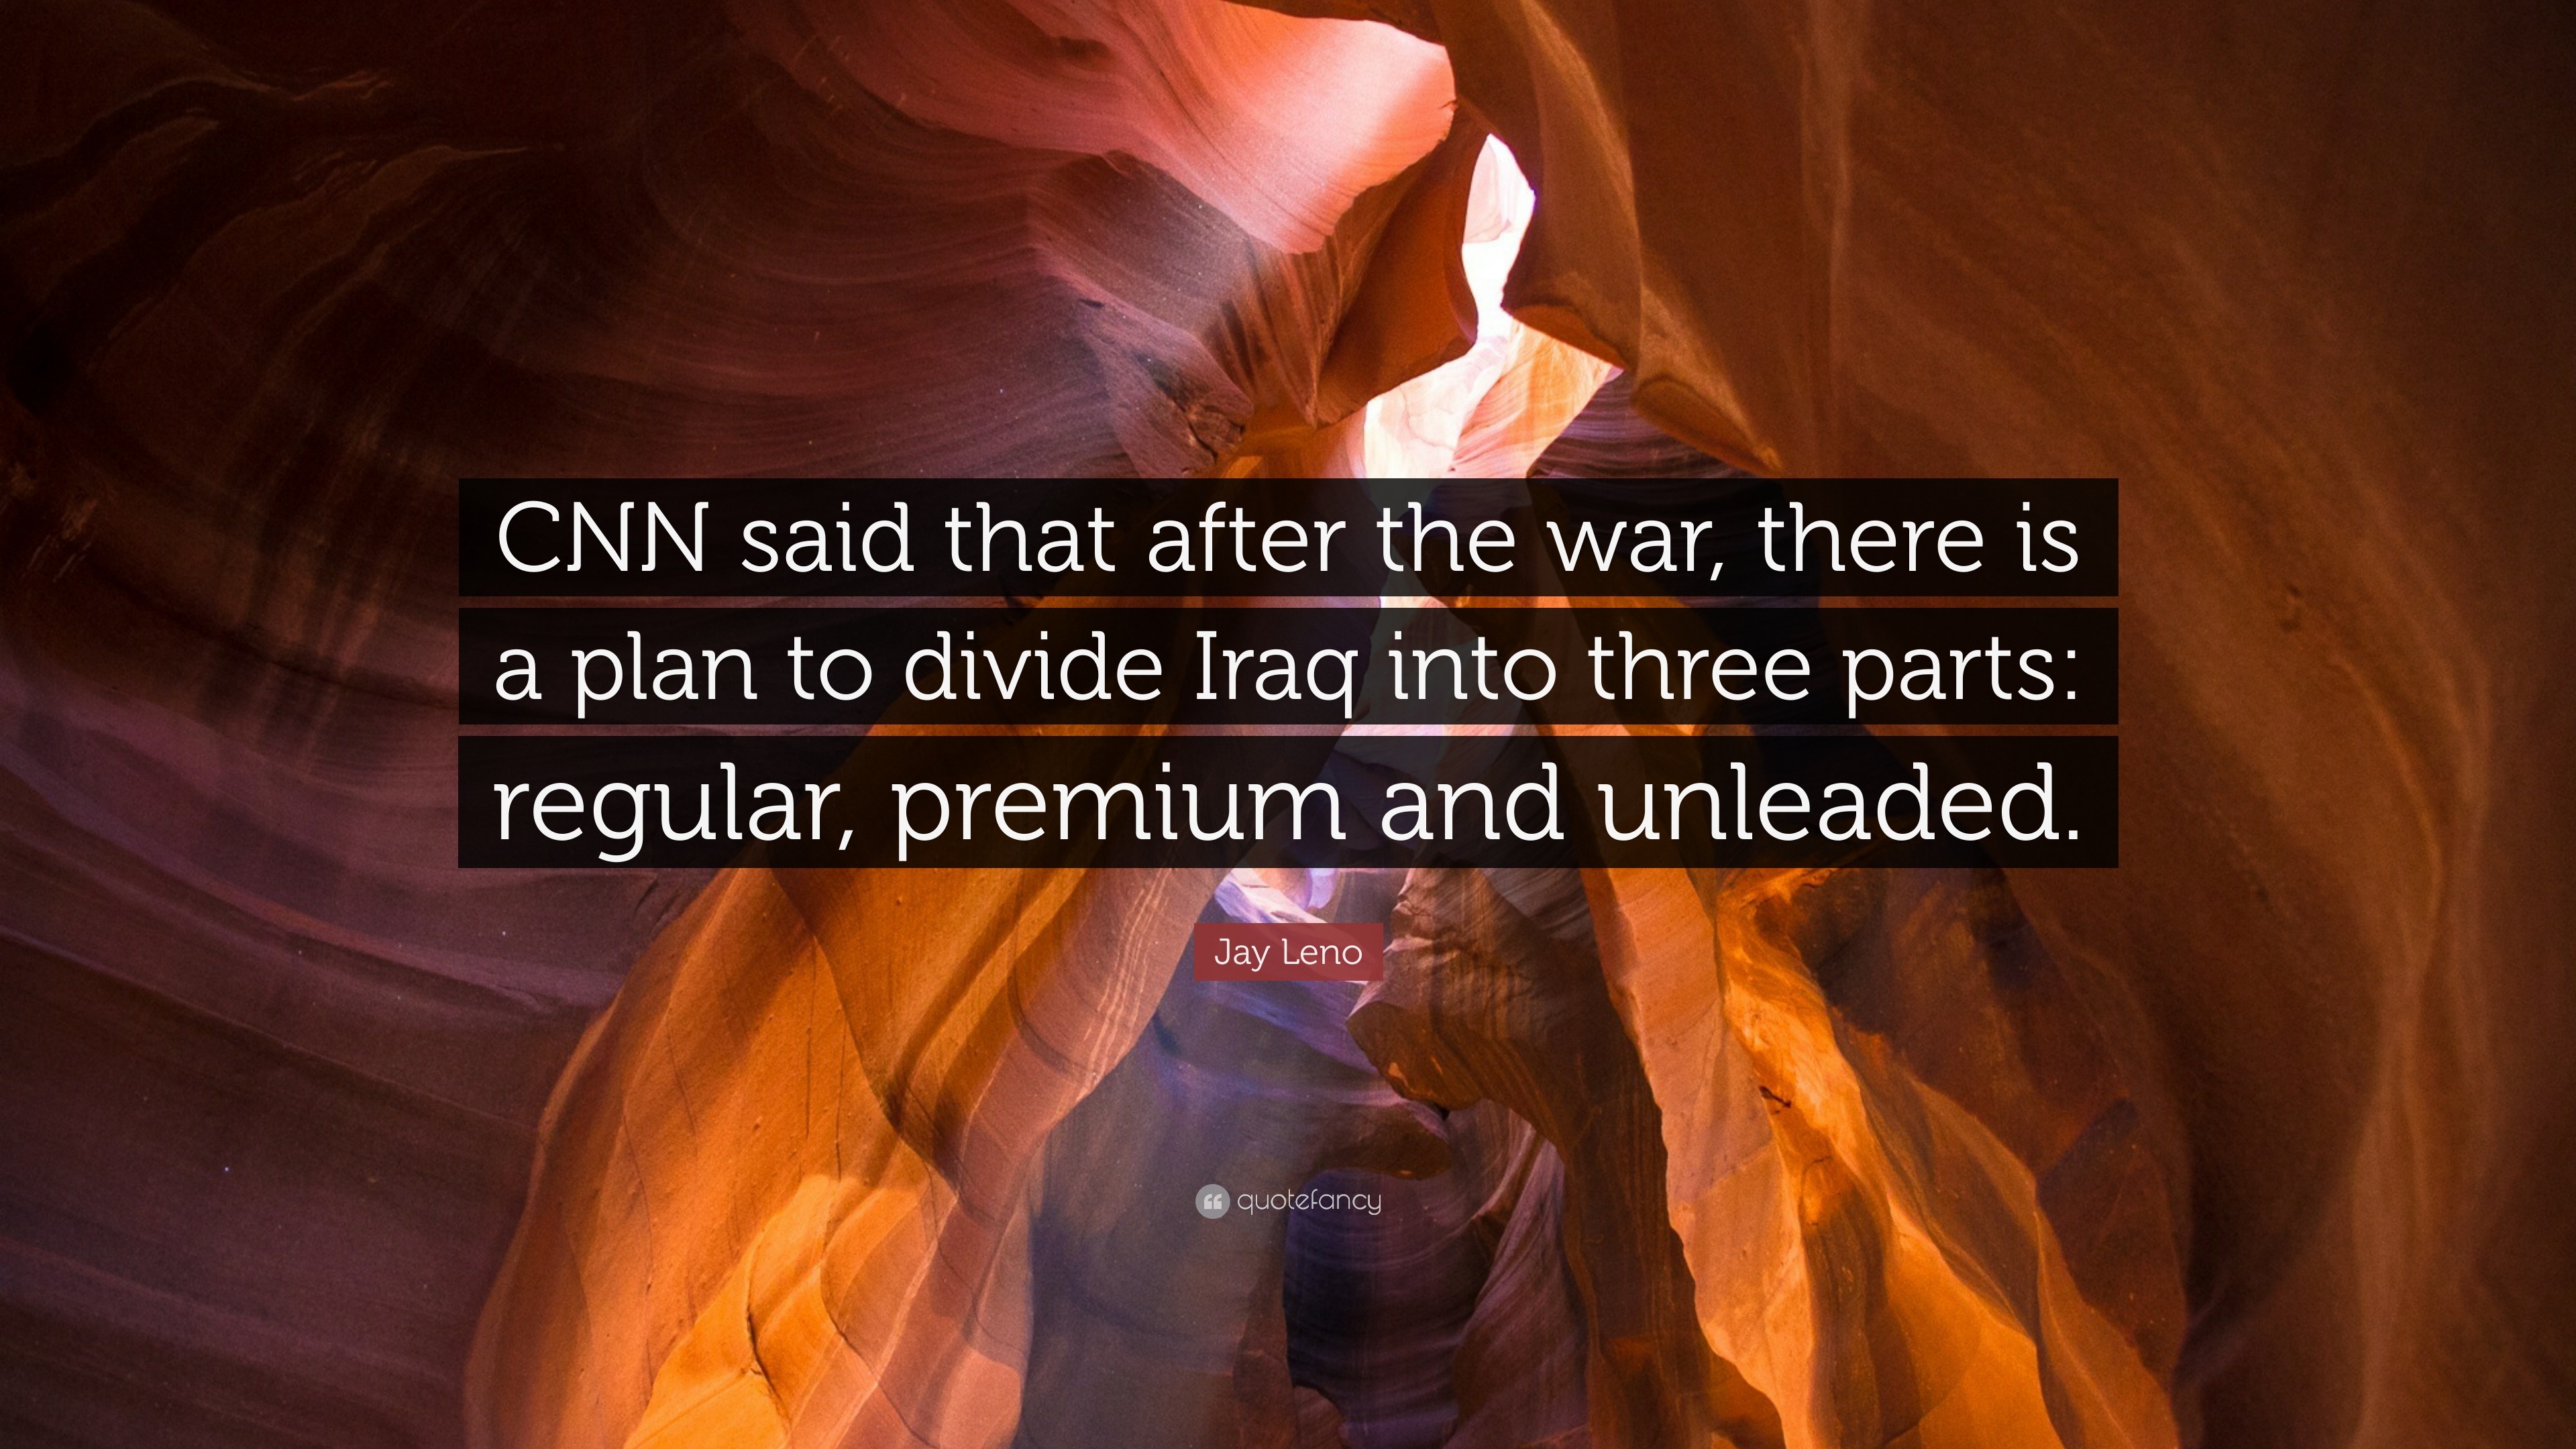 Jay Leno Quote “cnn Said That After The War There Is A Plan To Divide Iraq Into Three Parts